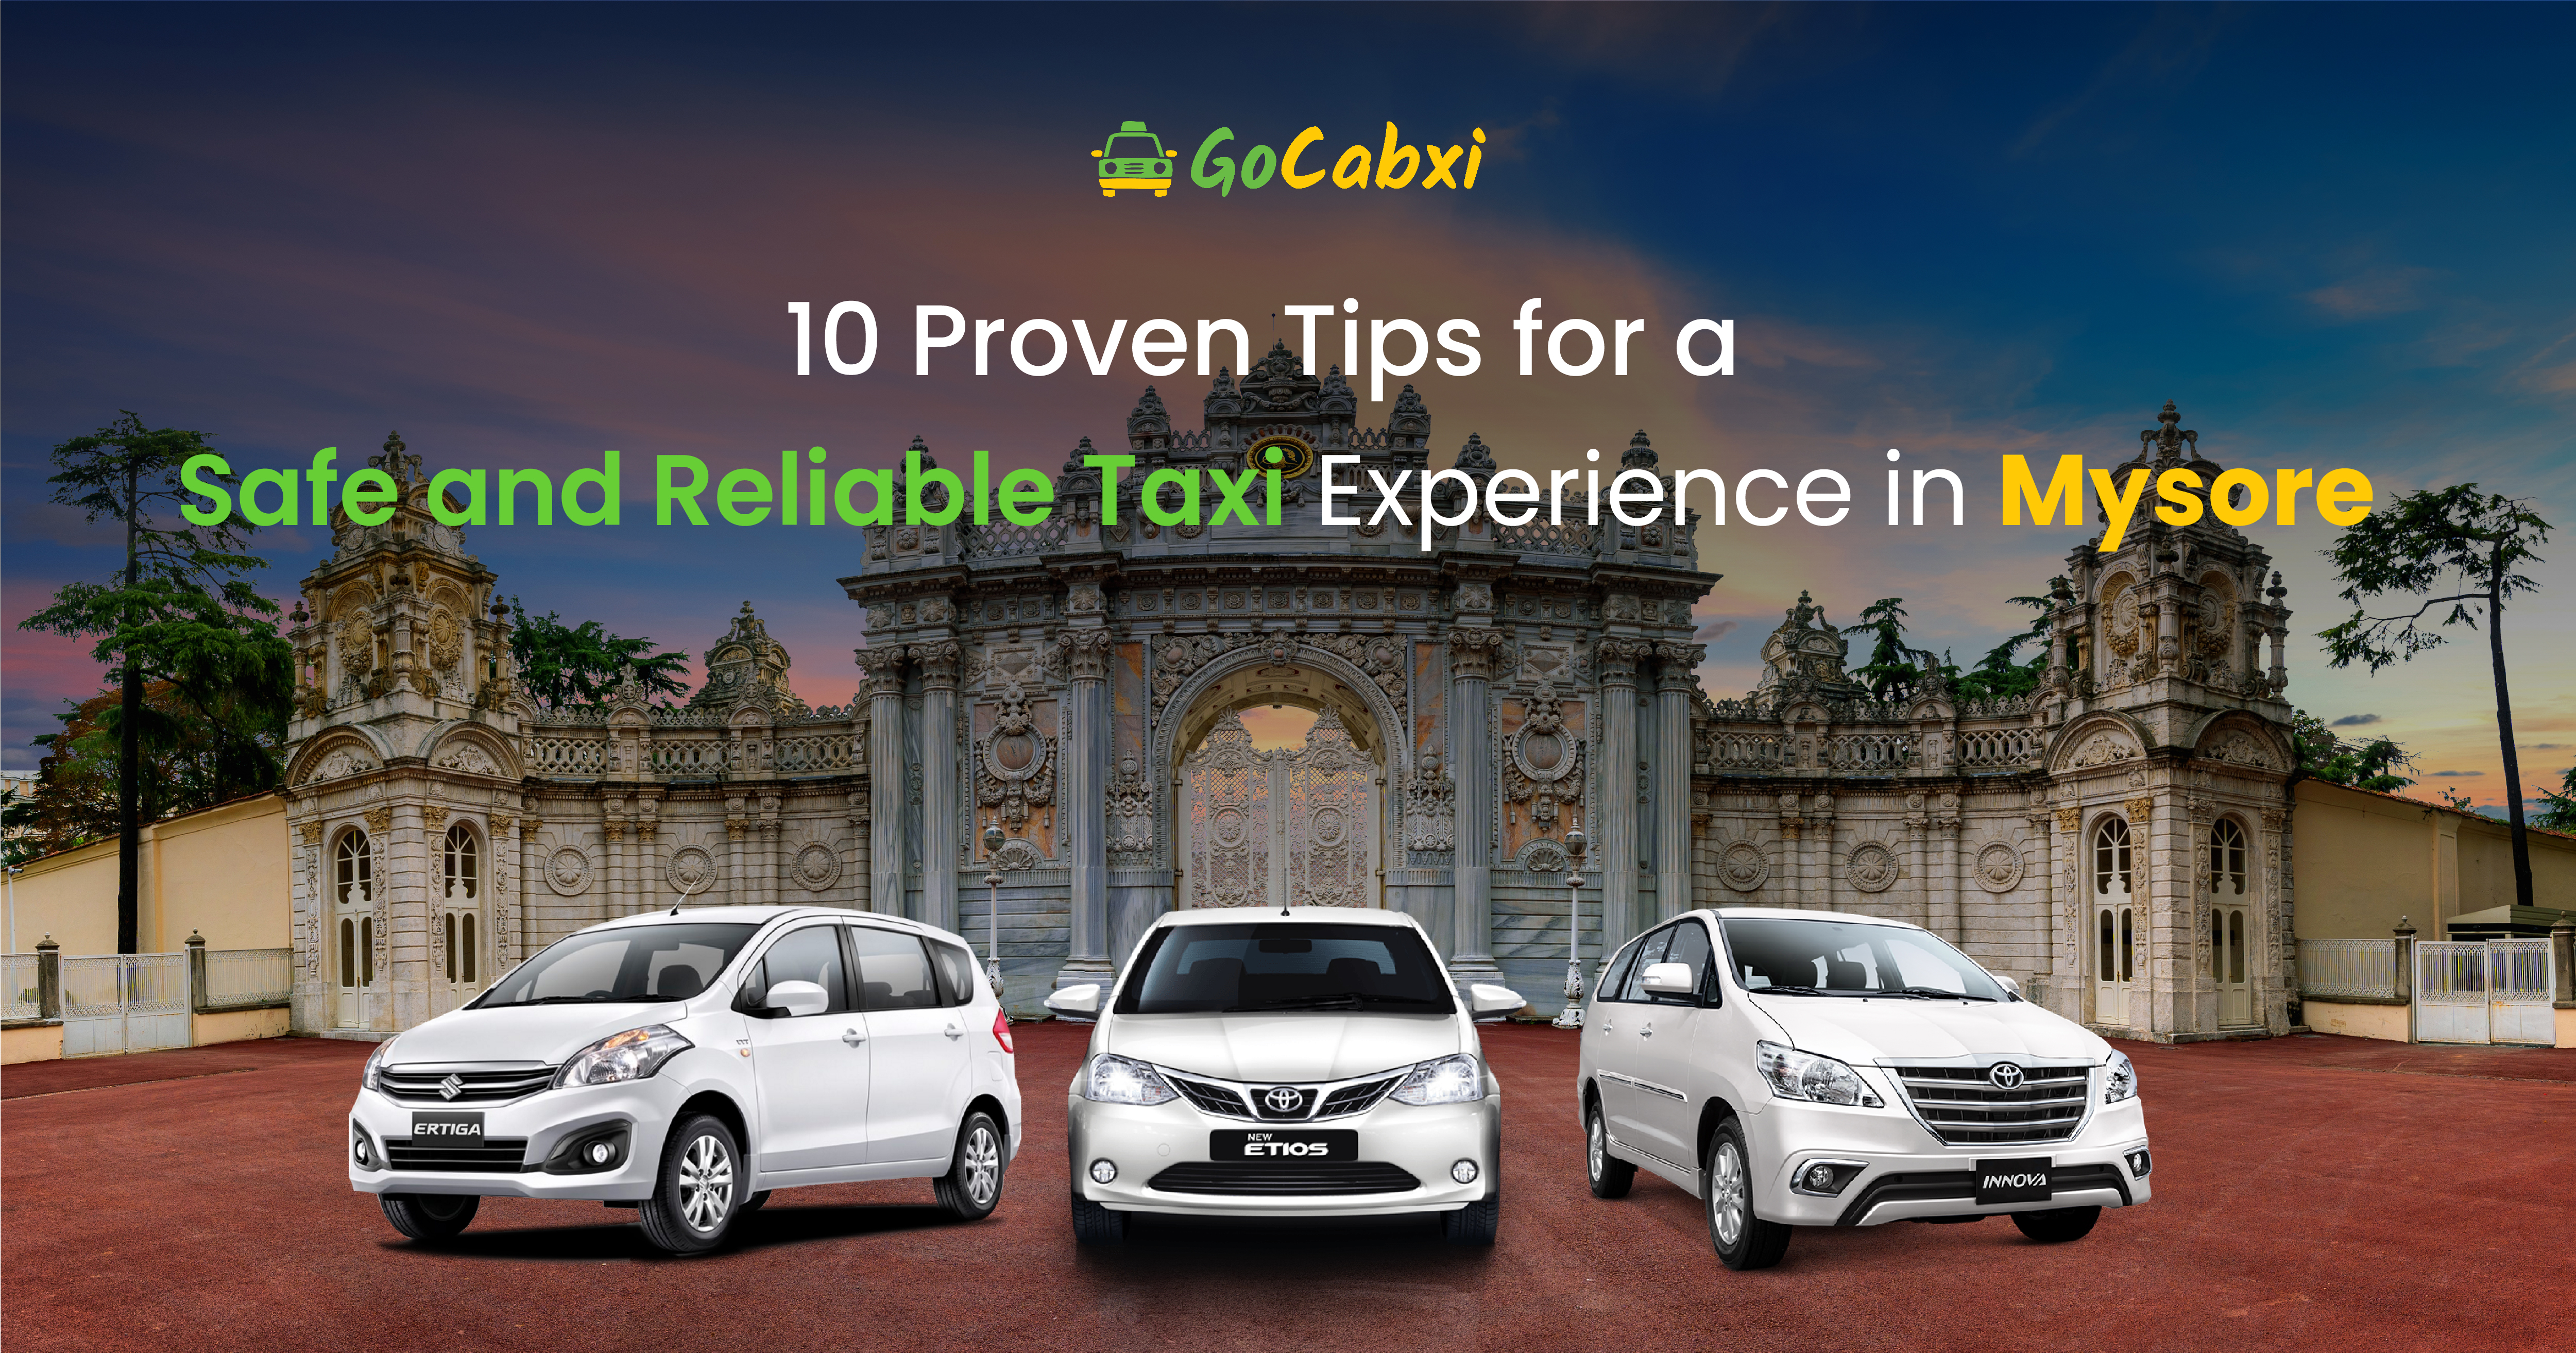 10 Proven Tips for a Safe and Reliable Taxi Experience in Mysore